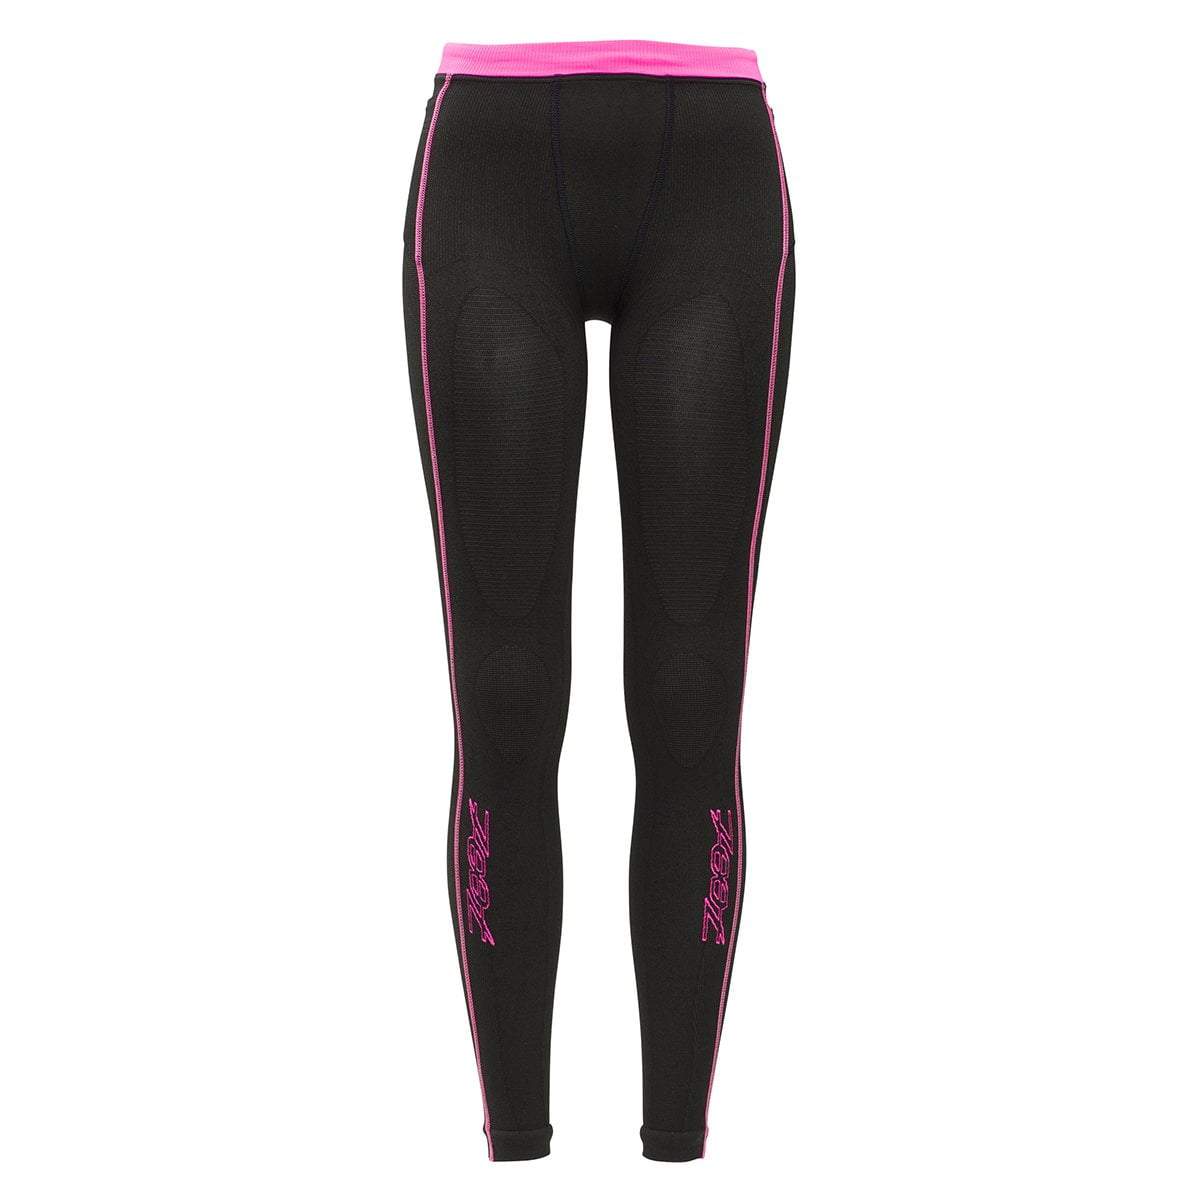 Cord Management Full Length Volleyball Tights & Leggings. Nike IN